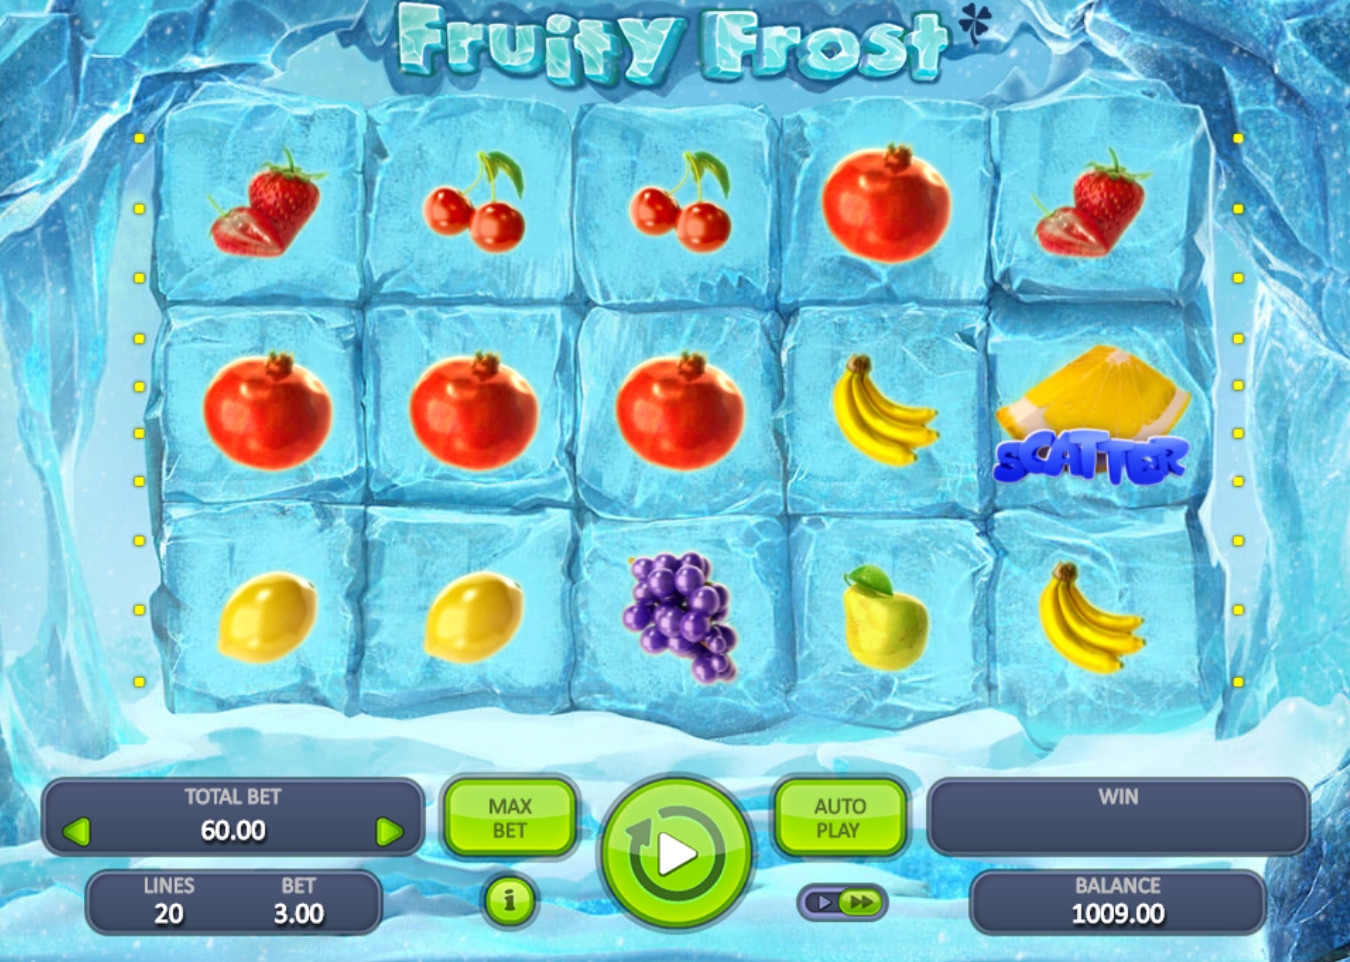 Fruity Frost (Fruity Frost) from category Slots